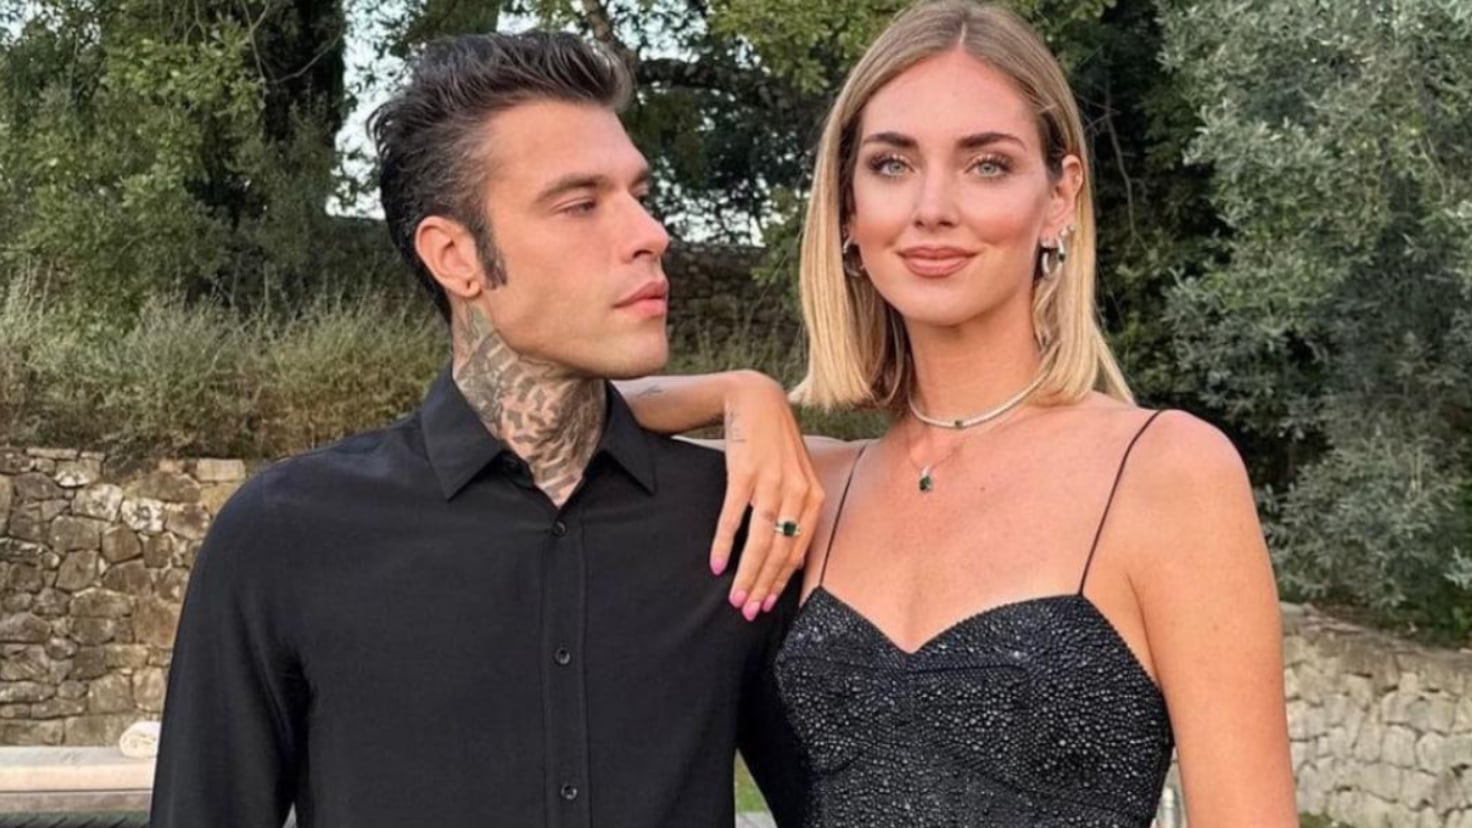 Strong disagreement between Chiara Ferragni and Fedez: Federico, enough is enough
